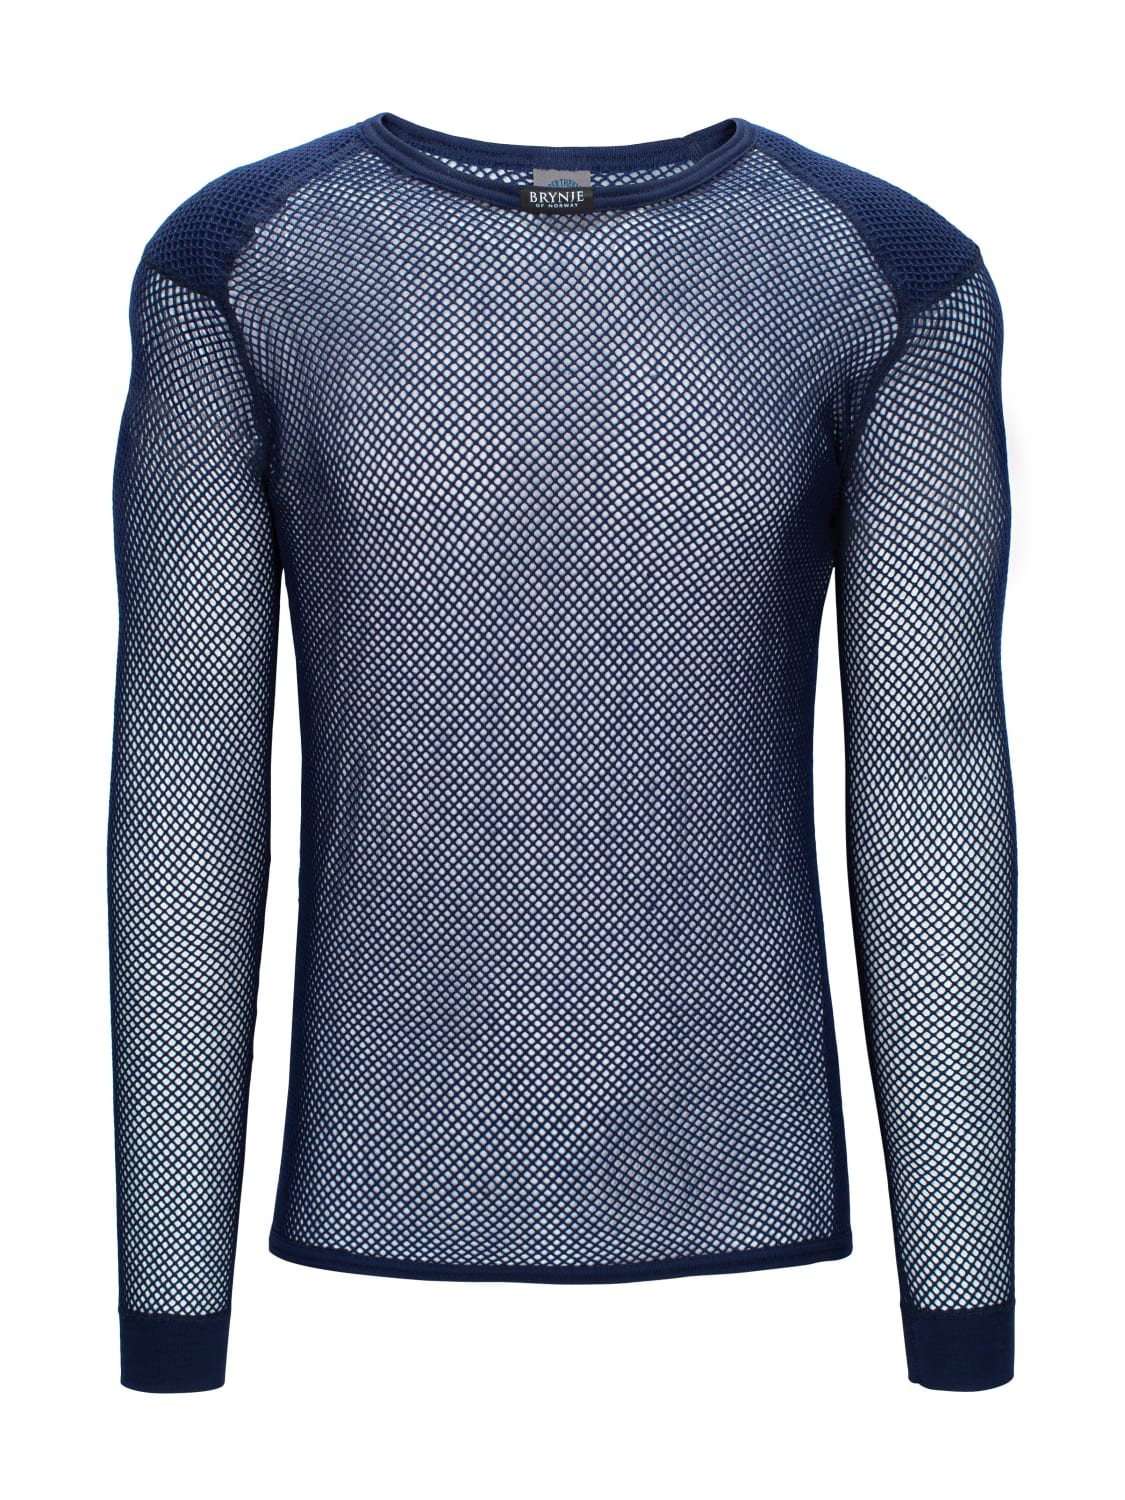 Super Thermo Shirt w/ panels